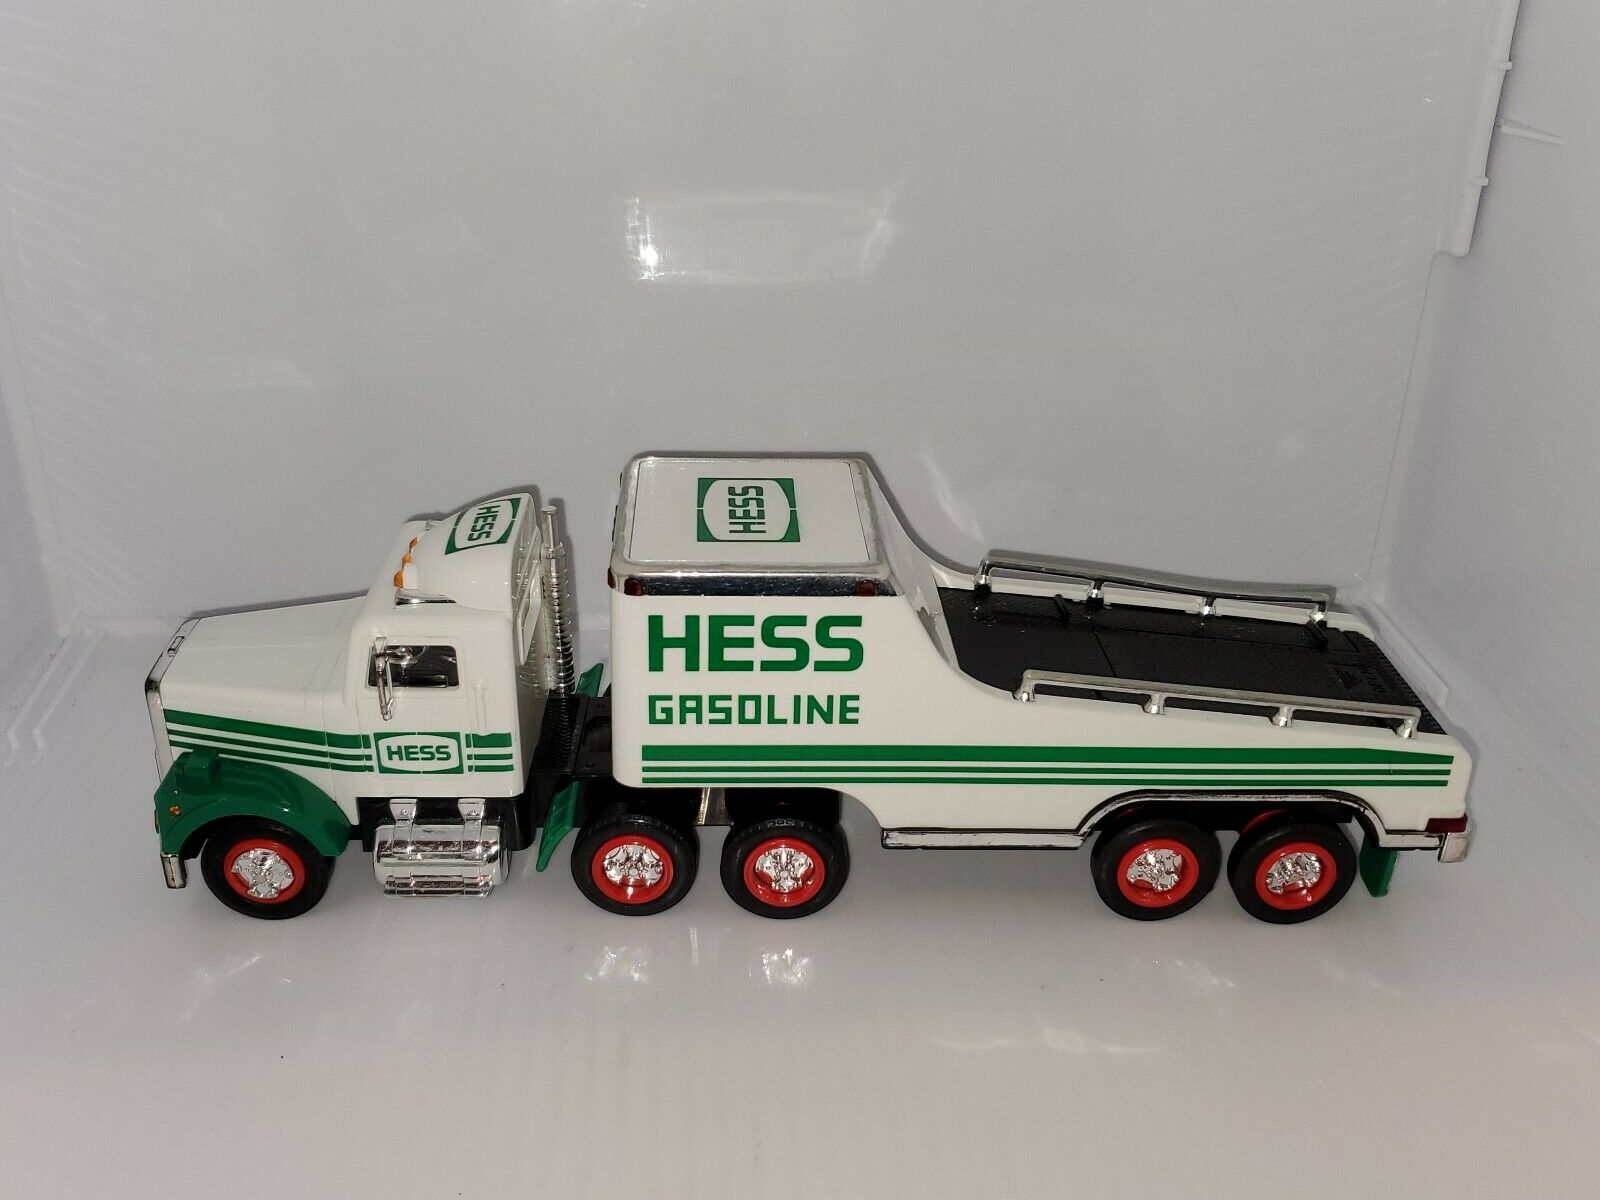 Hess Gasoline With Lights Hauling Toy Truck